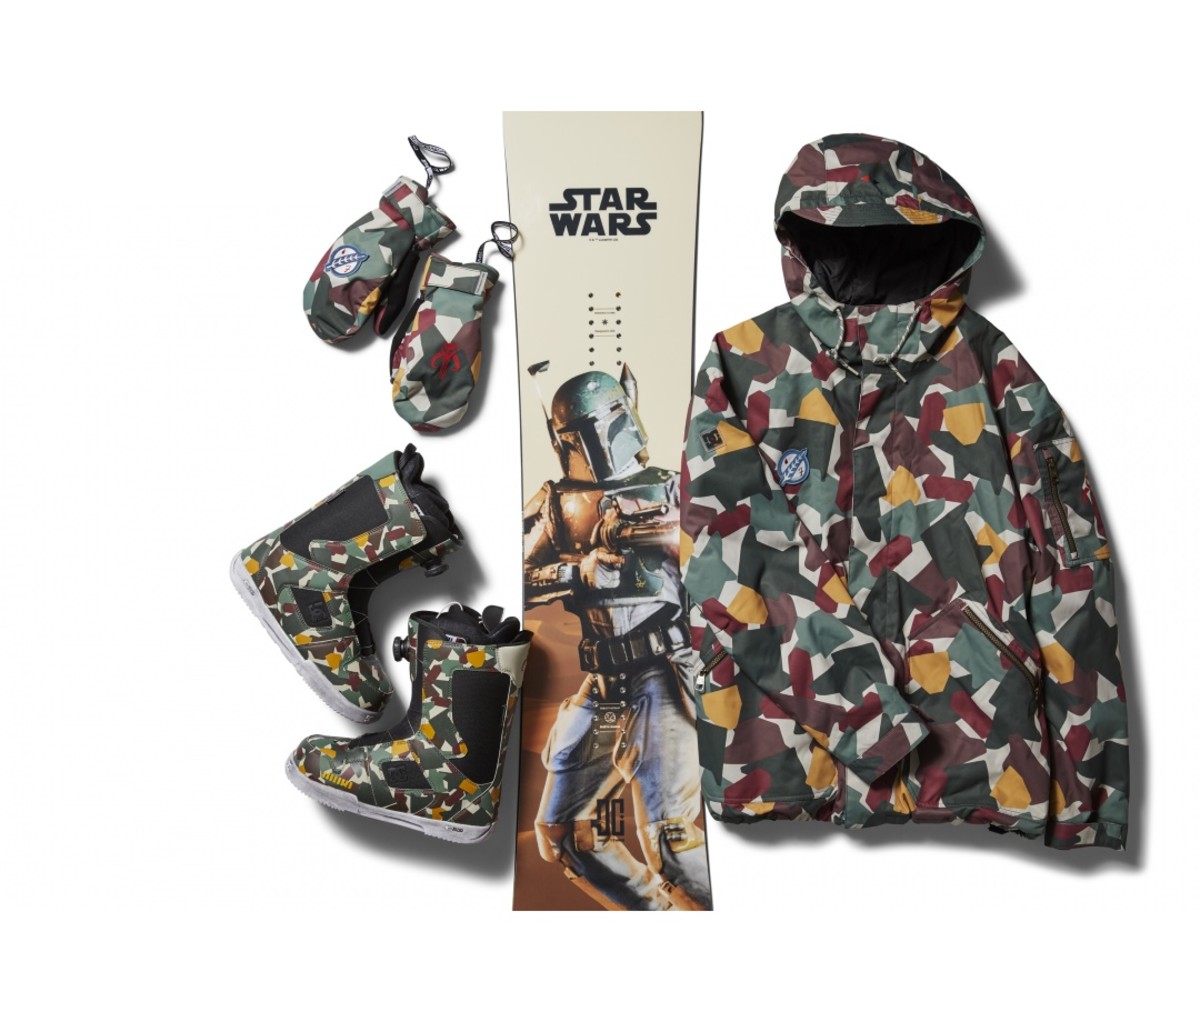 DC Shoes and Star Wars now have a cool new collection of snowboarding gear.